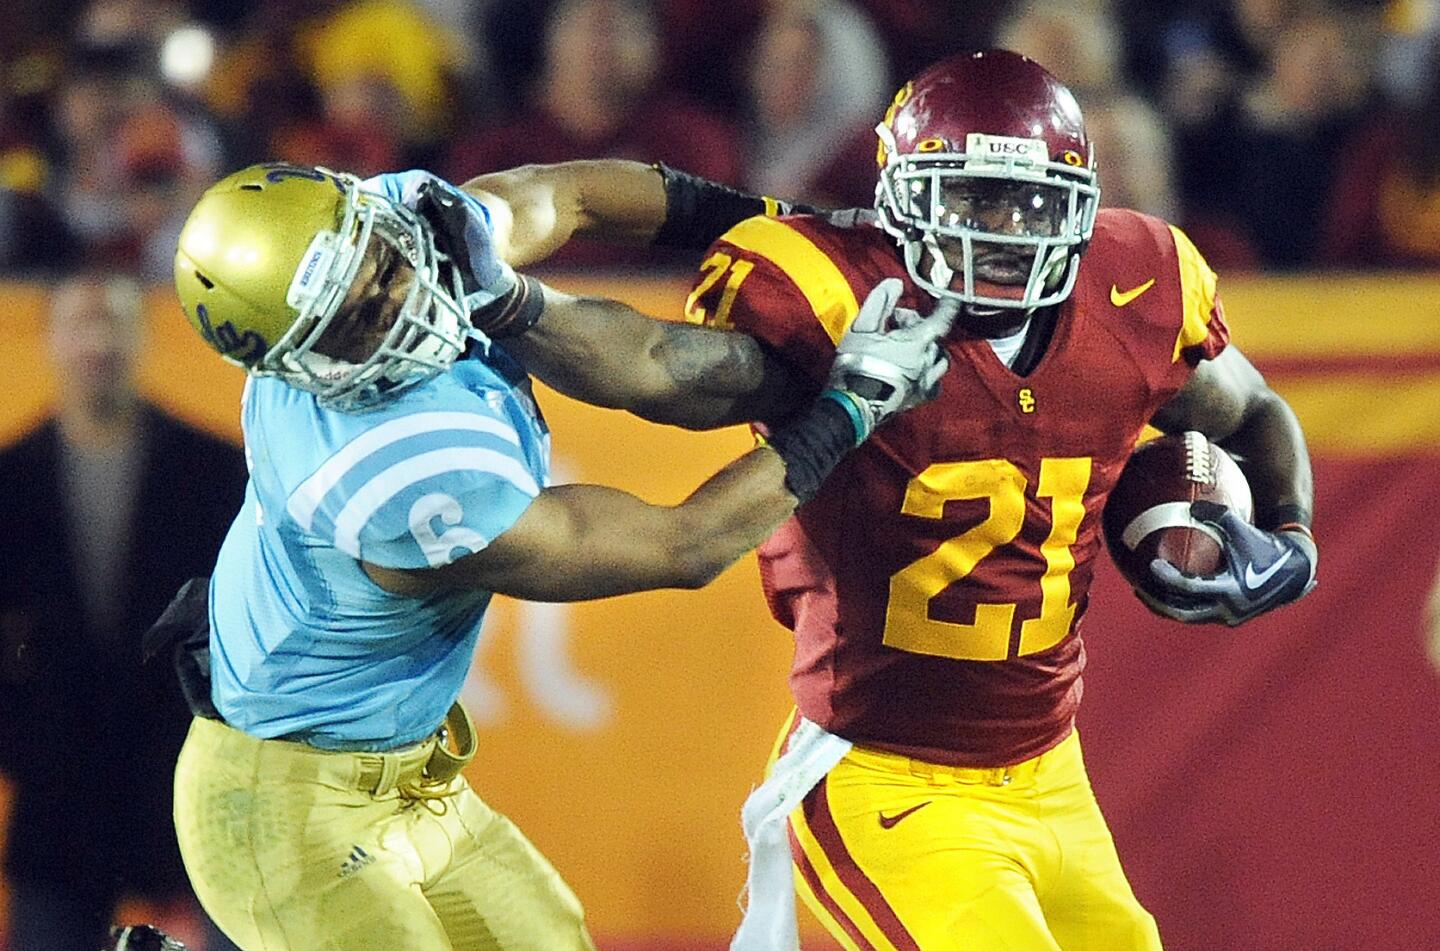 USC running back Allen Bradford stiff arms UCLA' safety Tony Dye for a big gain during the second quarter of a game at the Coliseum on Nov. 28, 2009.